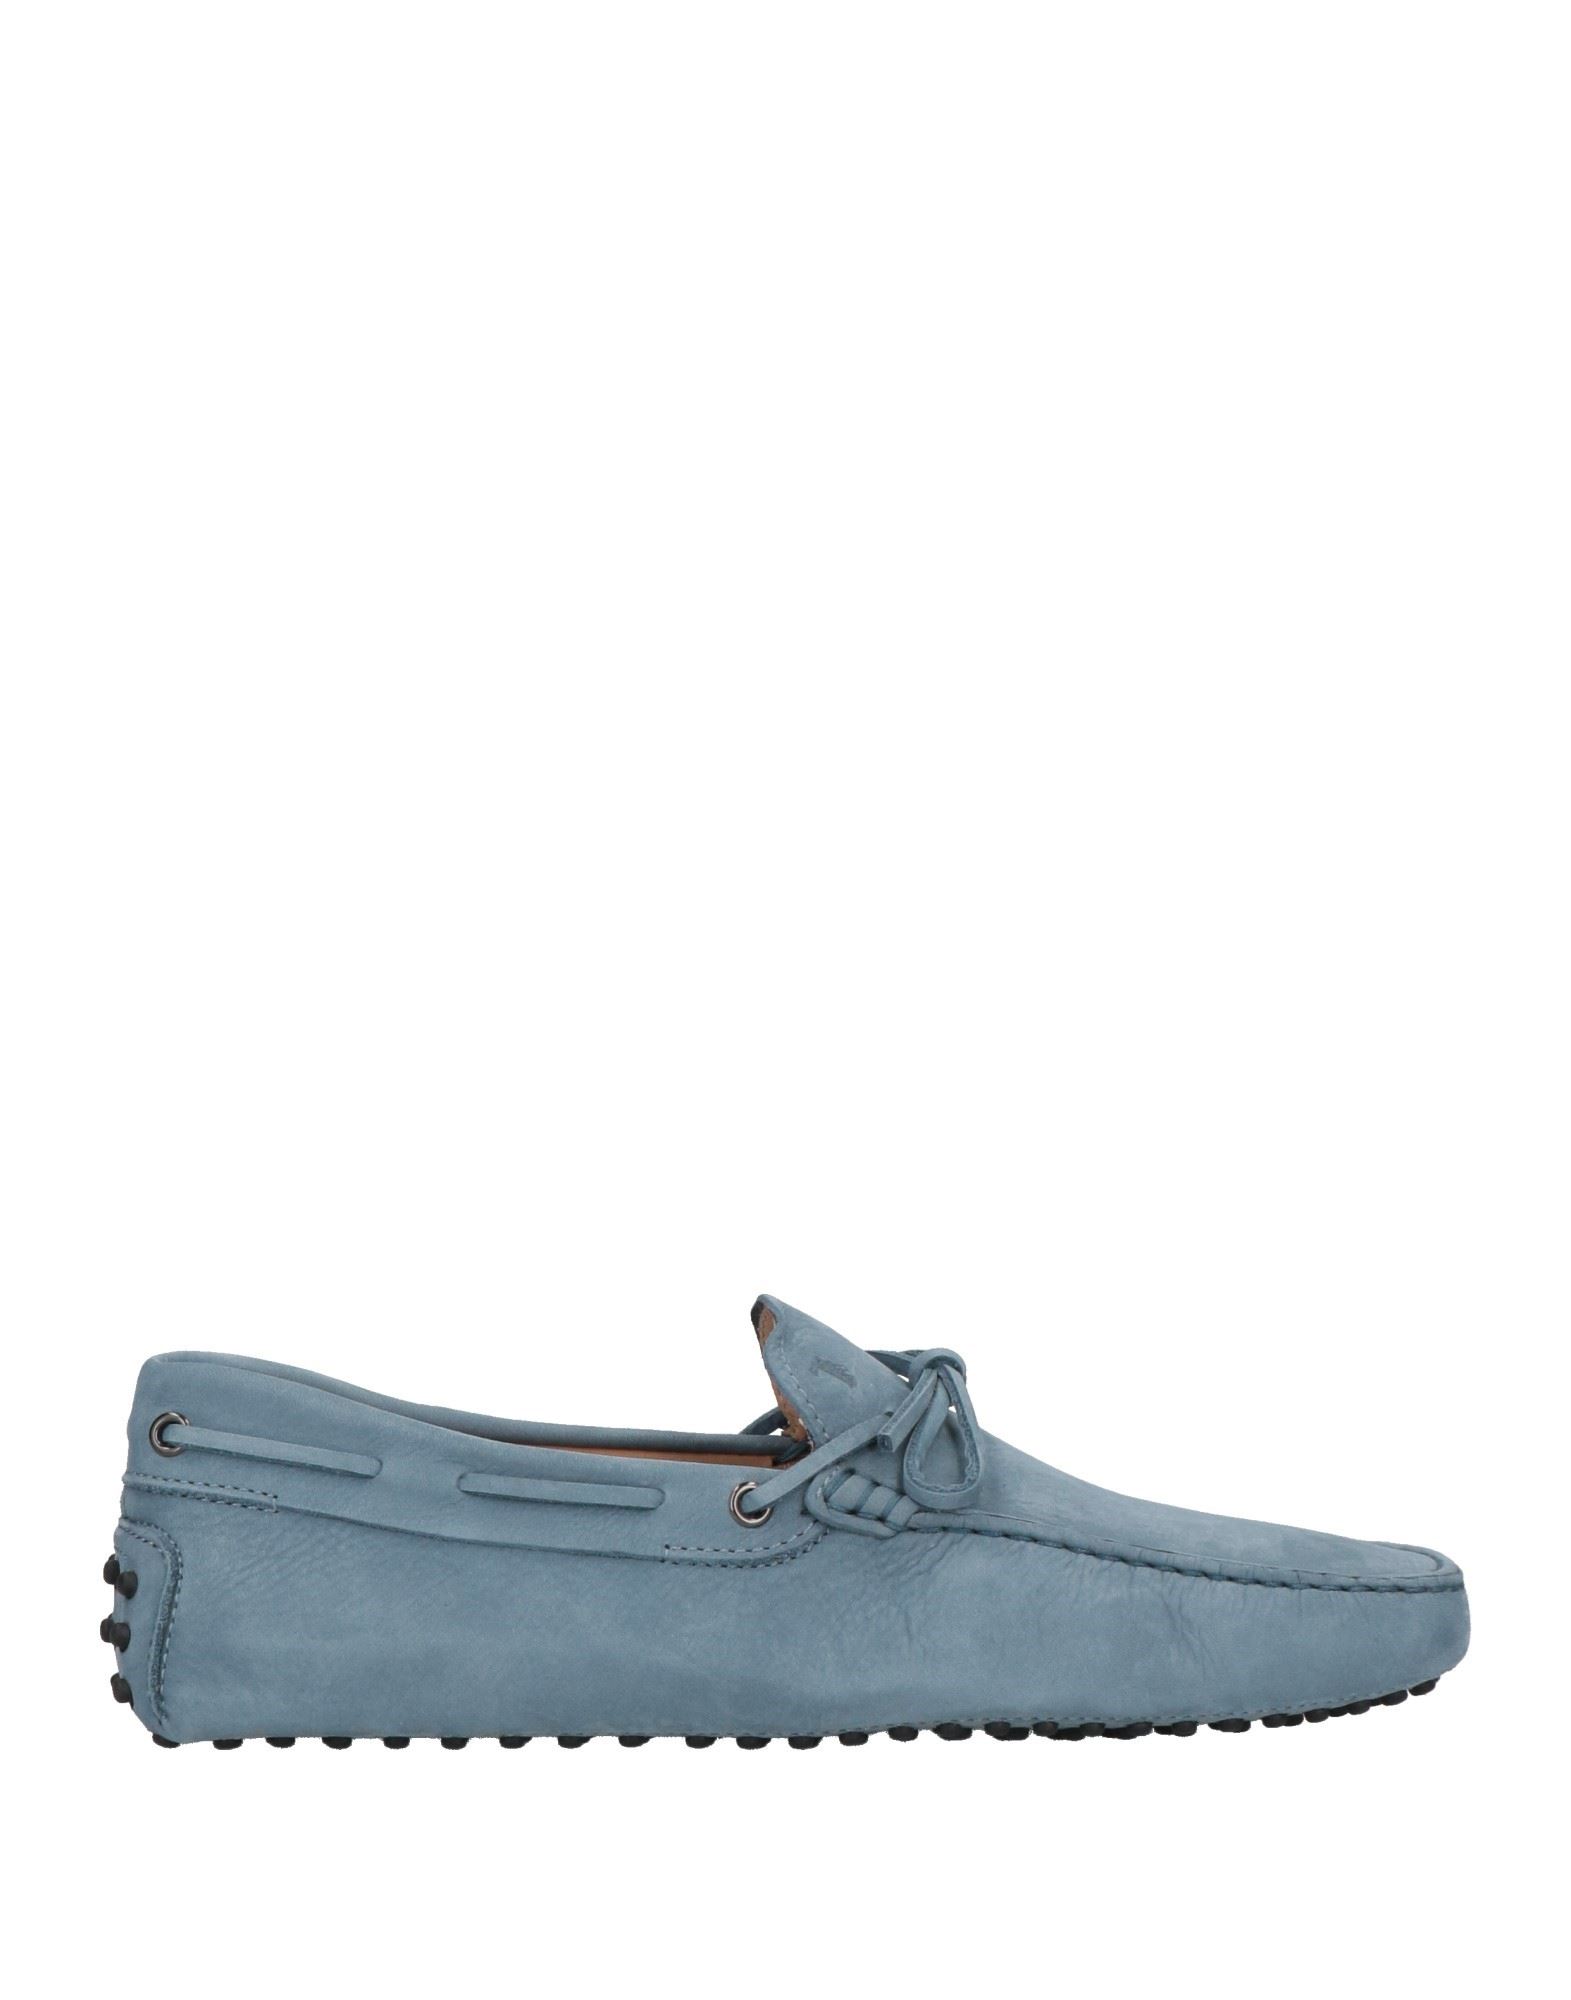 Tod's Man Loafers Pastel Blue Size 8 Leather